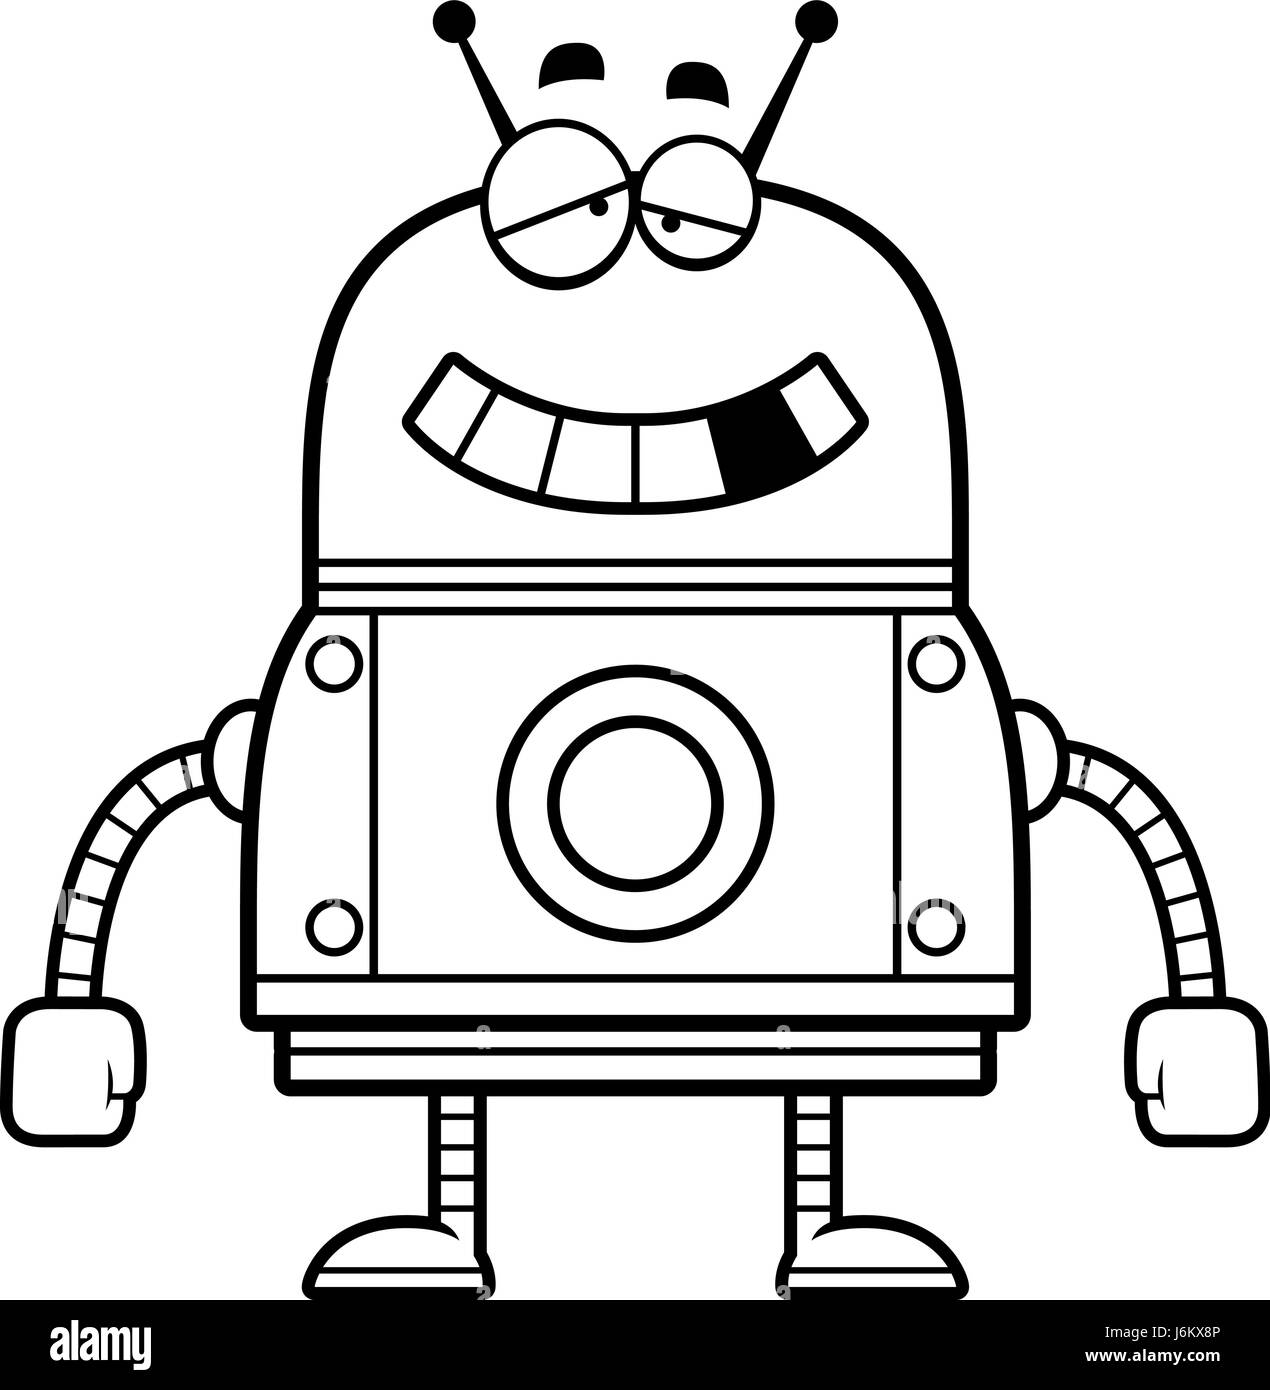 A cartoon illustration of a malfunctioning red robot. Stock Vector